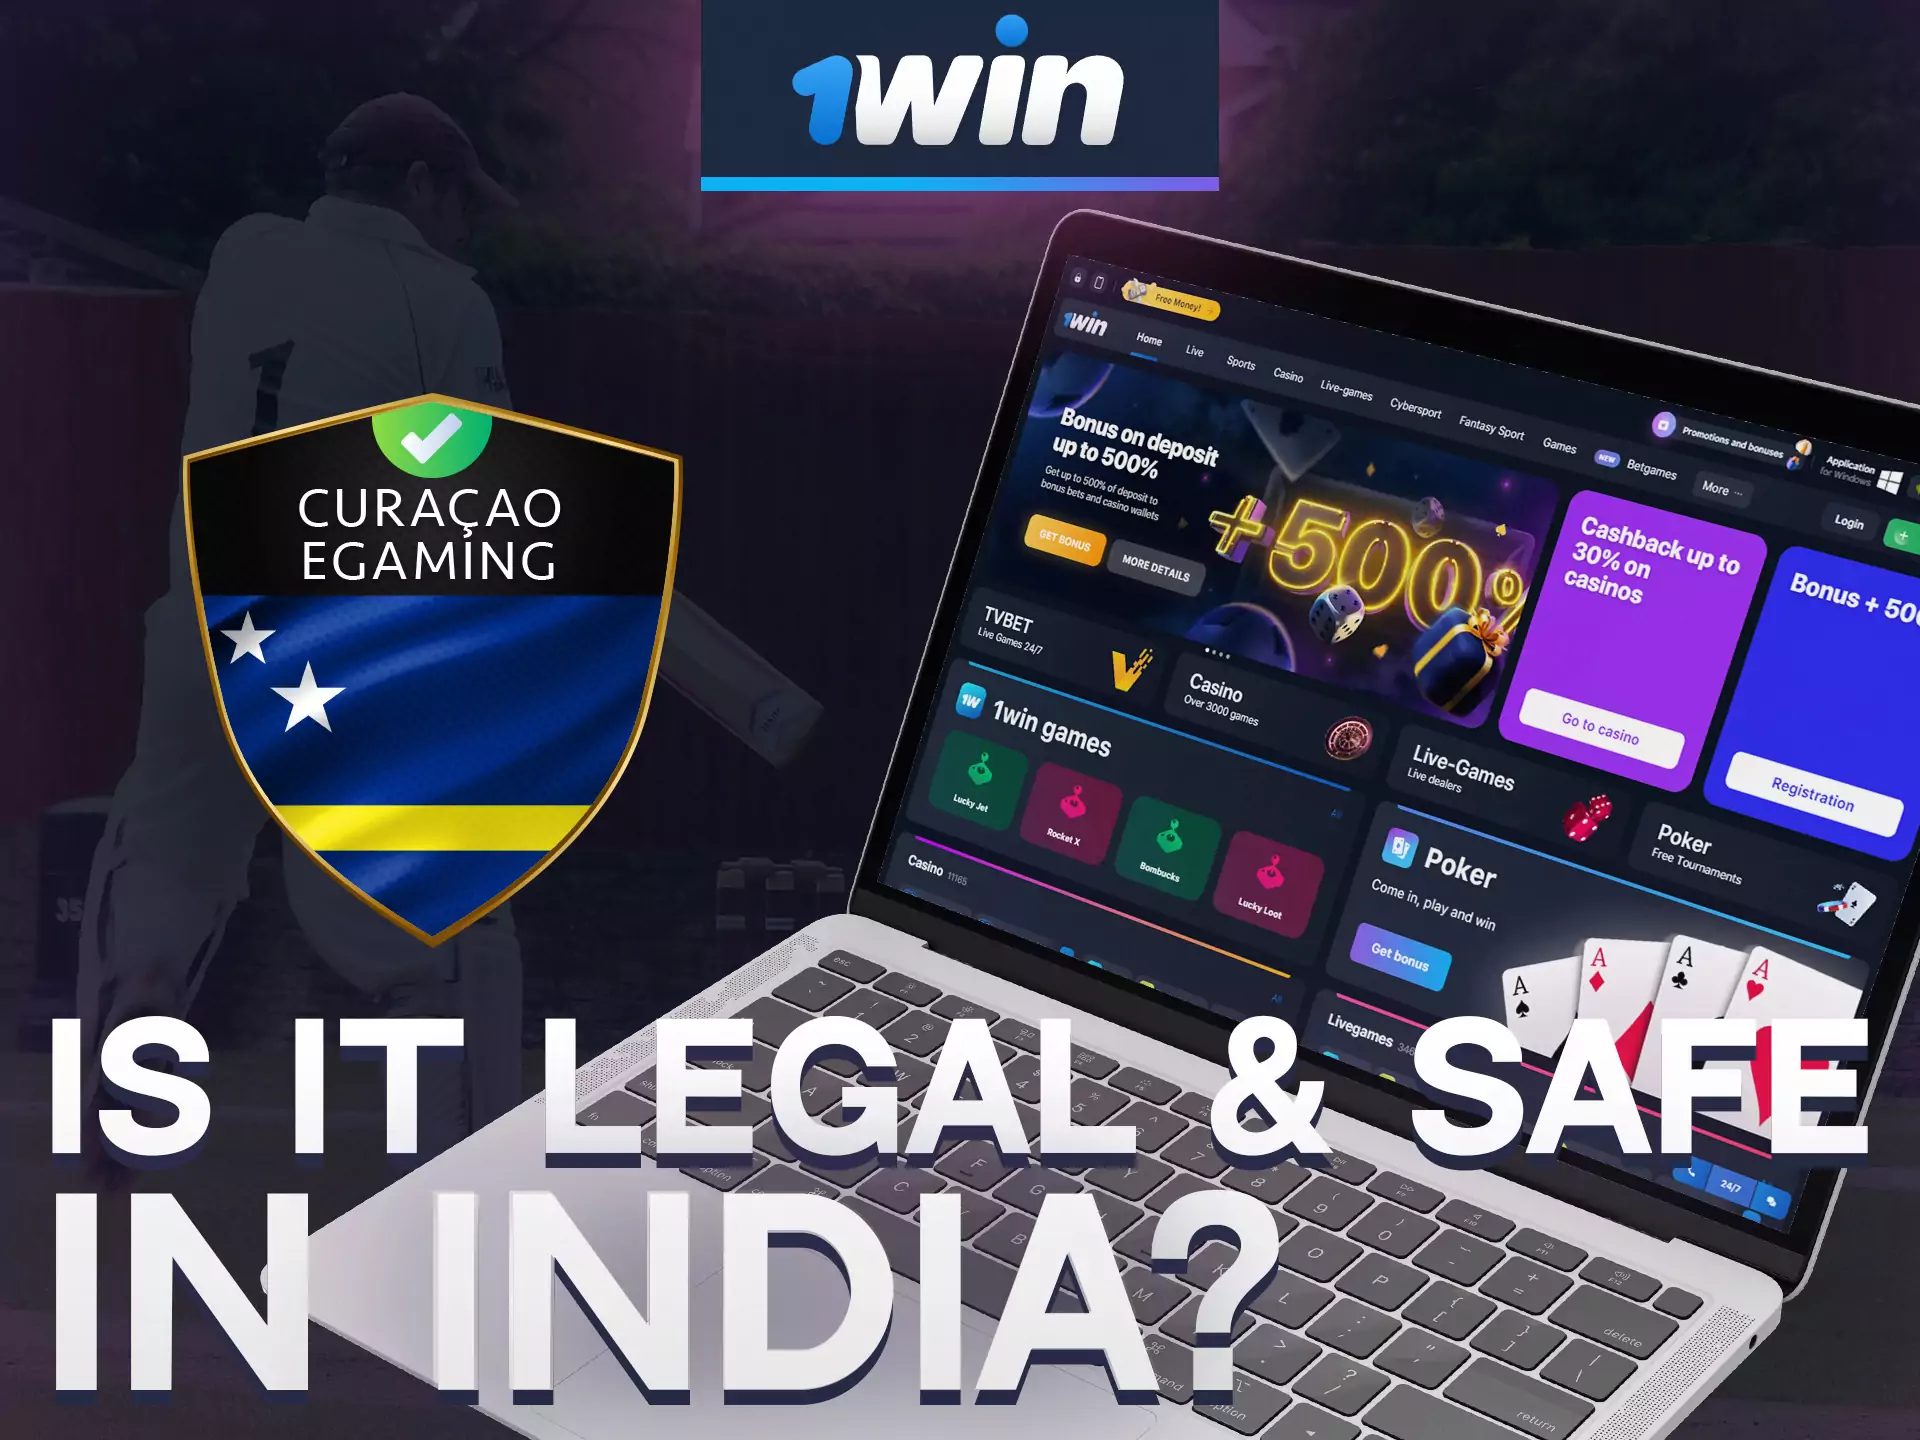 1win betting company is legal in India.